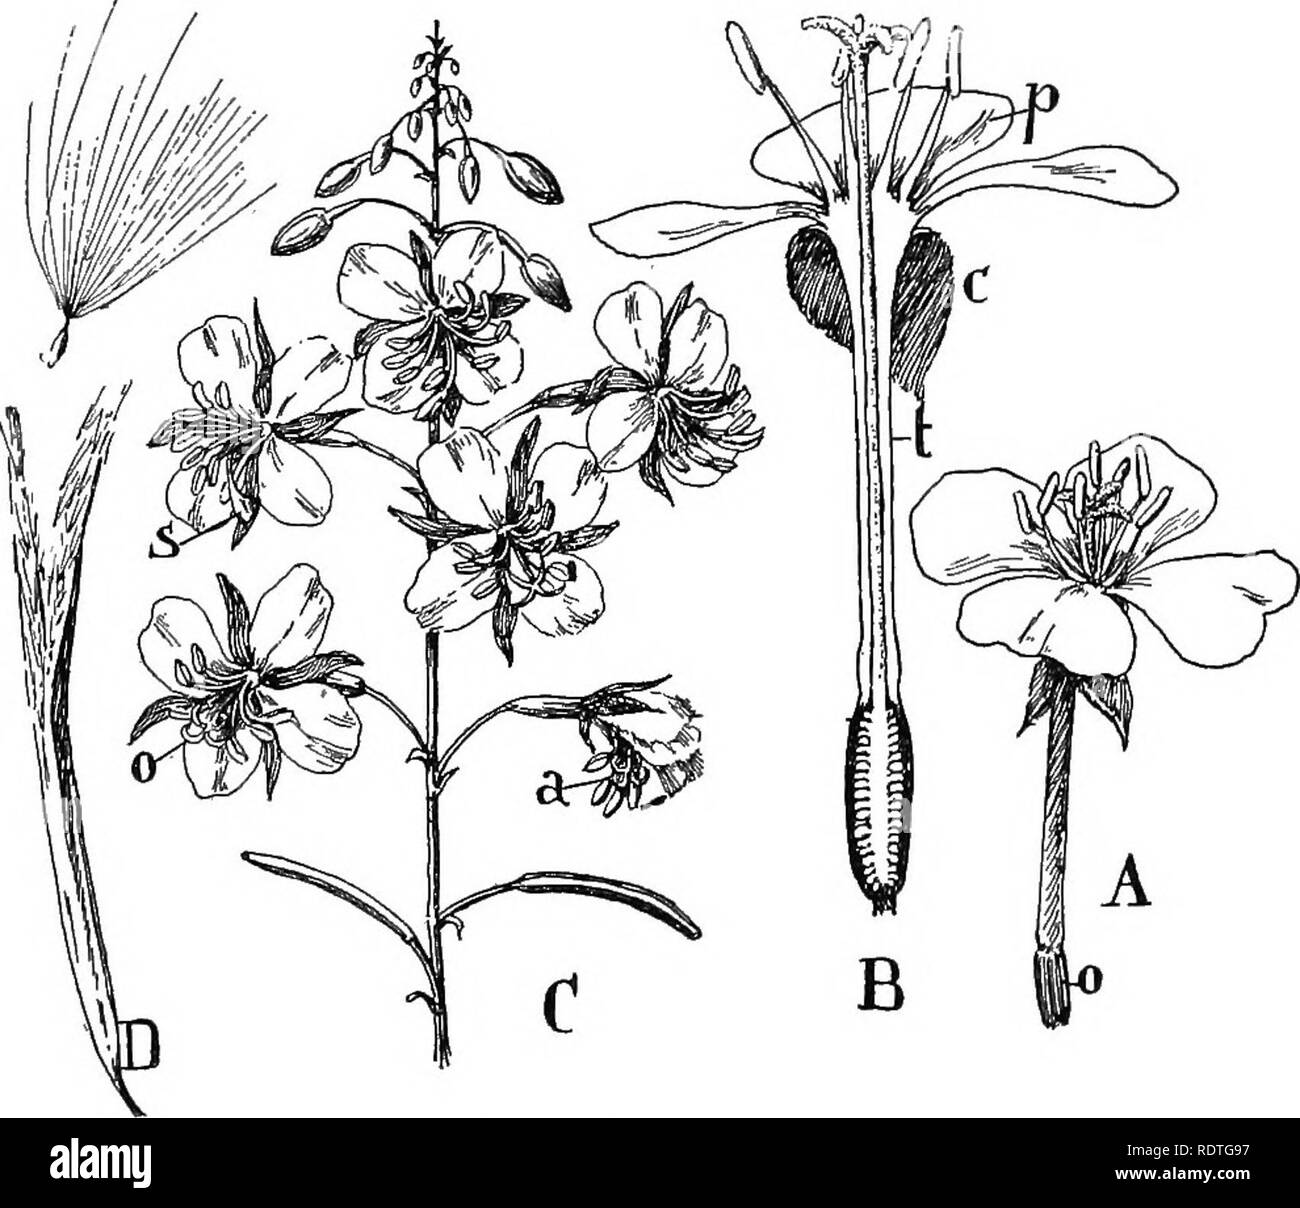 . Nature and development of plants. Botany. 464 THE MYRTALES mouth the linear segments of the calyx alternating with the round spreading petals and the stamens. At the time of the opening of the flower the eight anthers are shedding their spores and are in line with the nectaries, while the lobed stigma is closed and bent backward (Fig. 323, C, s). A day later the stigmas assume the position shown in the lower flowers, the lobes curving backward so as to lie in the pathway leading to the nectaries (Fig. 323, C, 0). It is evident that these positions. Fig. 323. Higher forms of the Myrtales, flo Stock Photo